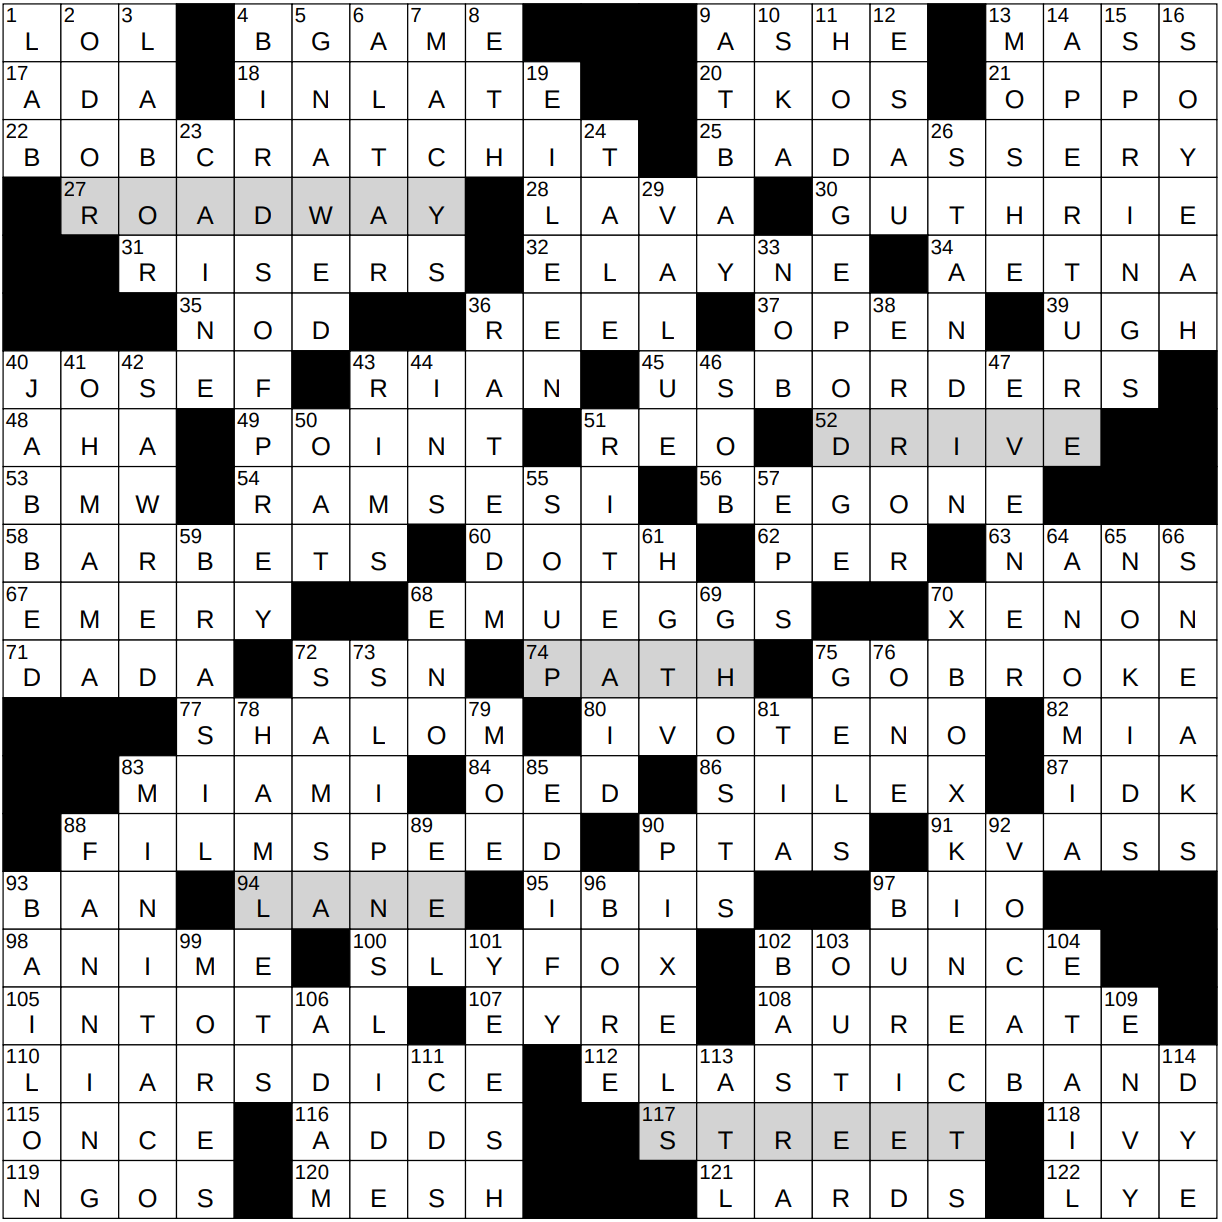 Just 2 Words - TODAY'S JULY 16 JUMBLE CROSSWORD PUZZLE I've placed two  answers to today's Jumble Crossword clues at the bottom of this post. Keep  your eyes up here and see